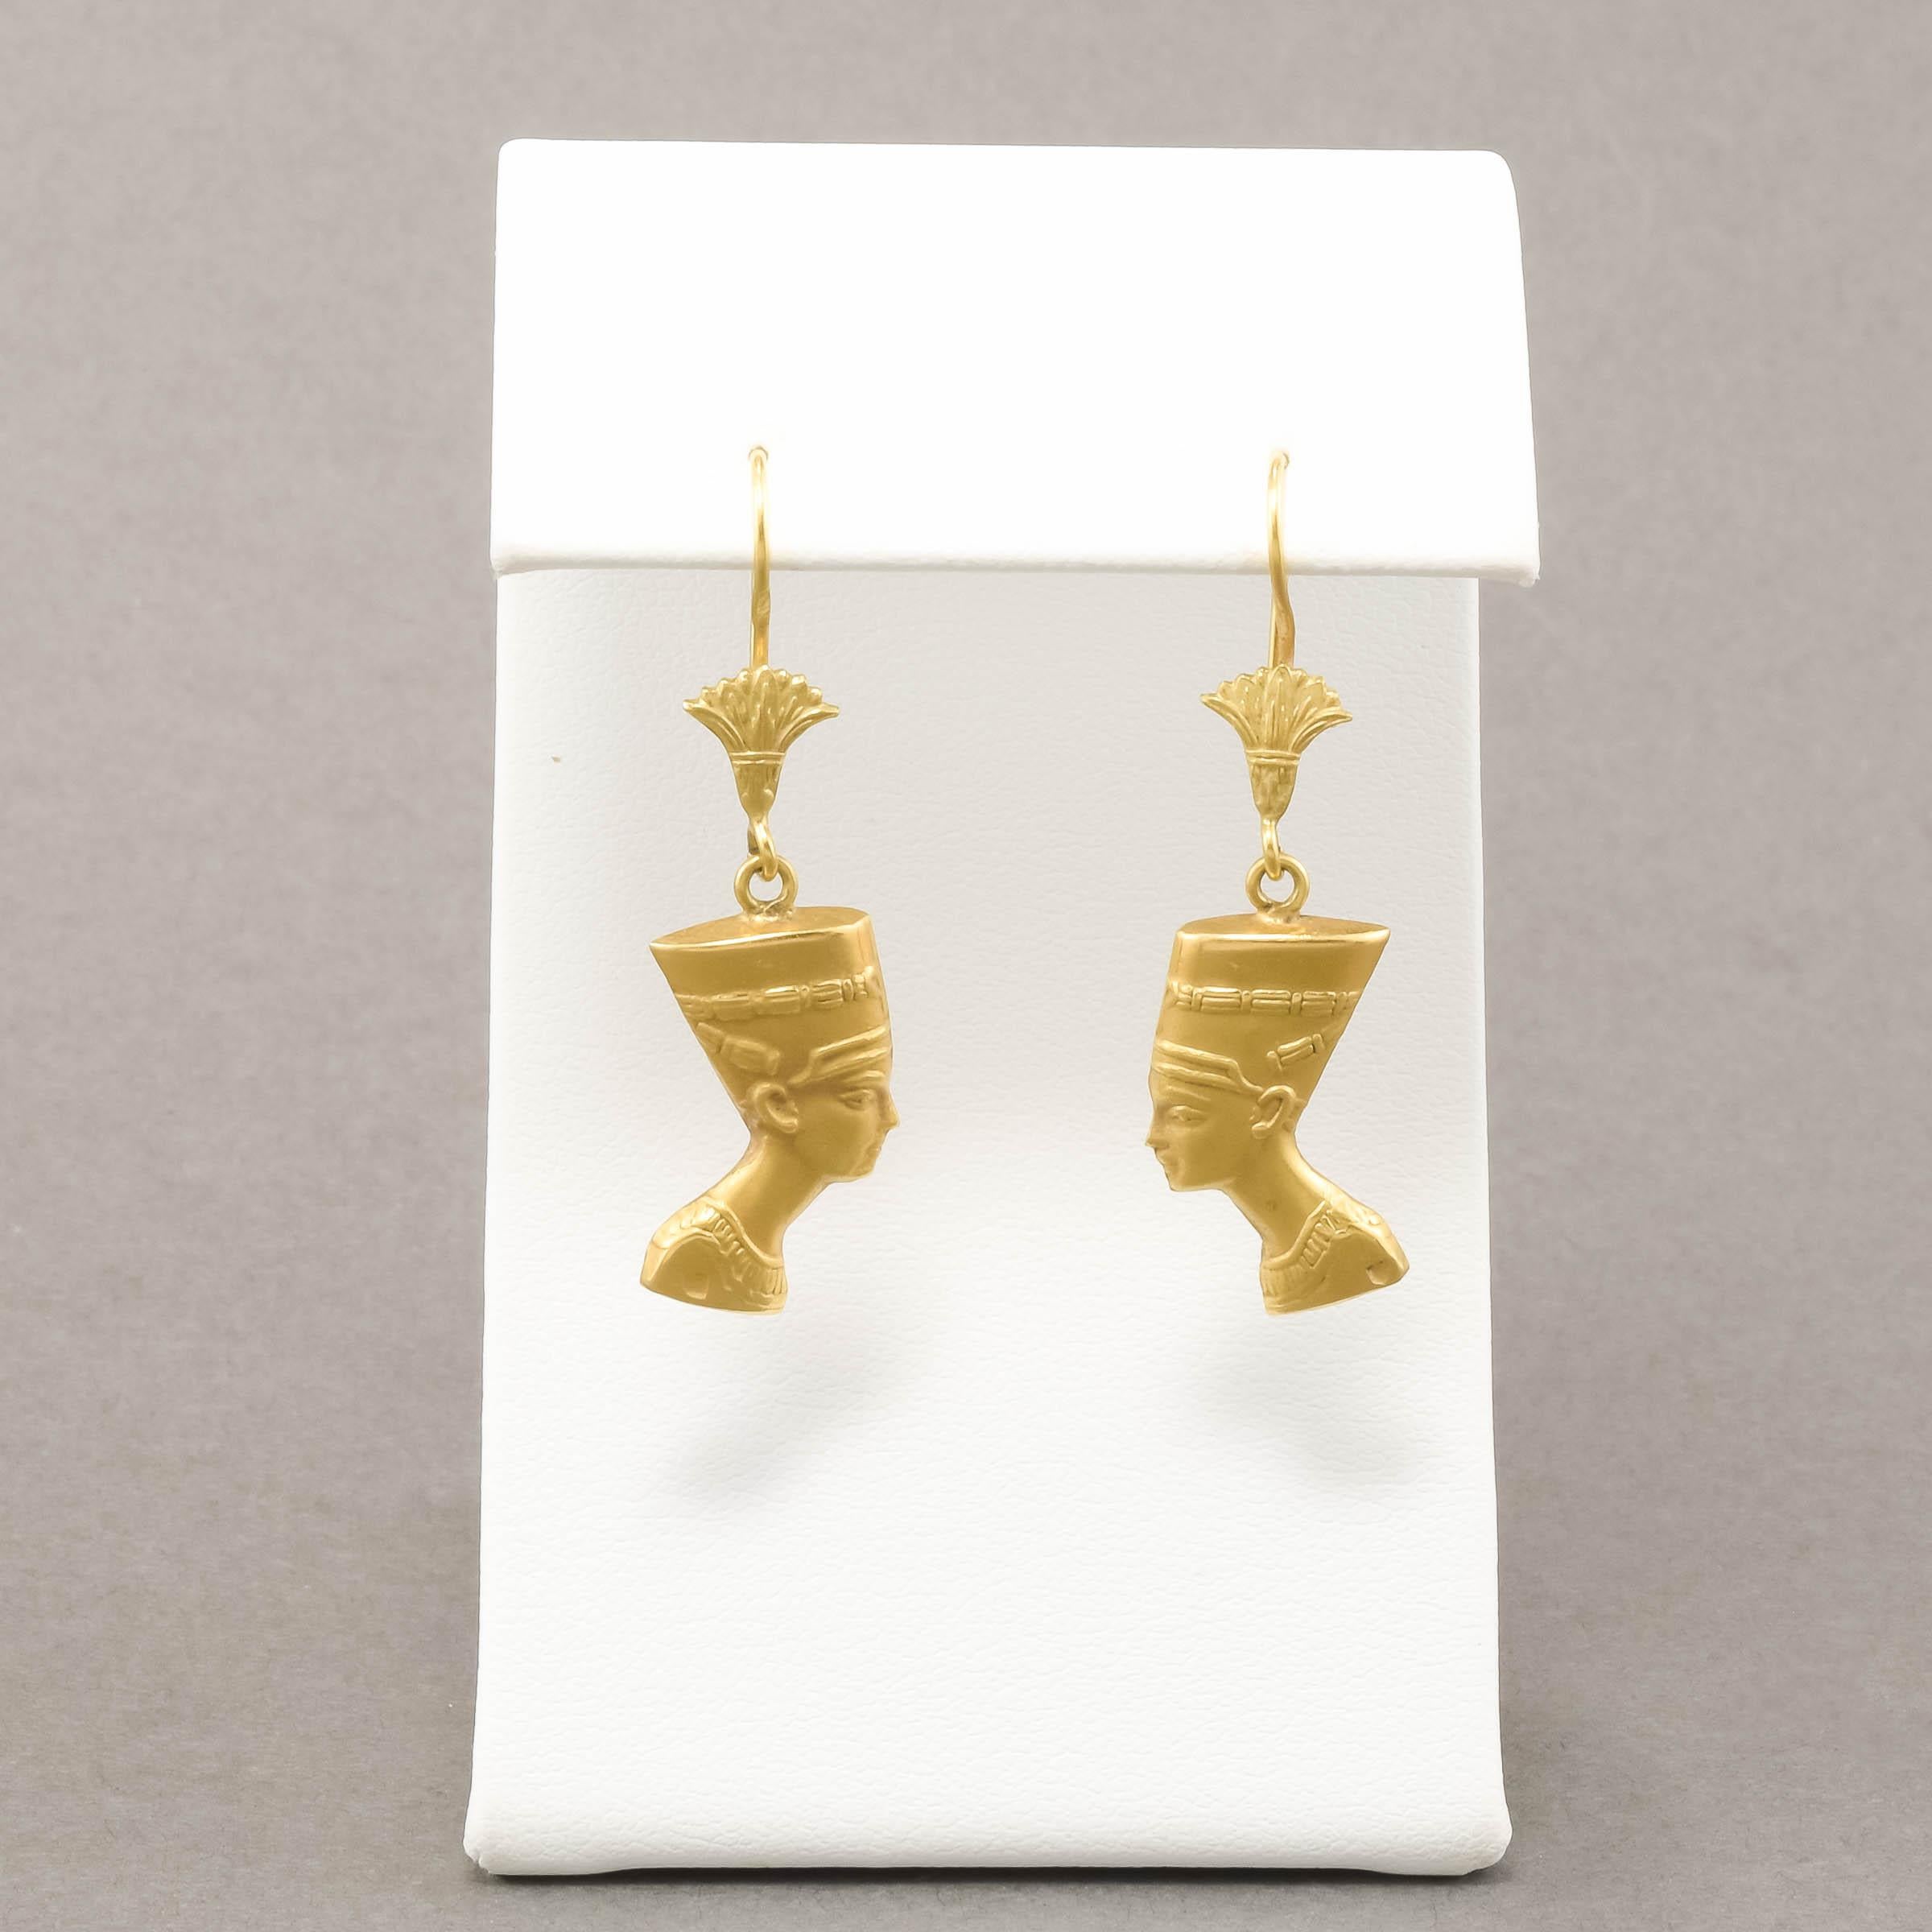 Beautifully designed and made, these elegant Nefertiti earrings are the nicest I've come across.  I especially love the lotus flower details on the ear wires.

Crafted of richly hued gold testing at 18K gold or a little higher, the earrings features